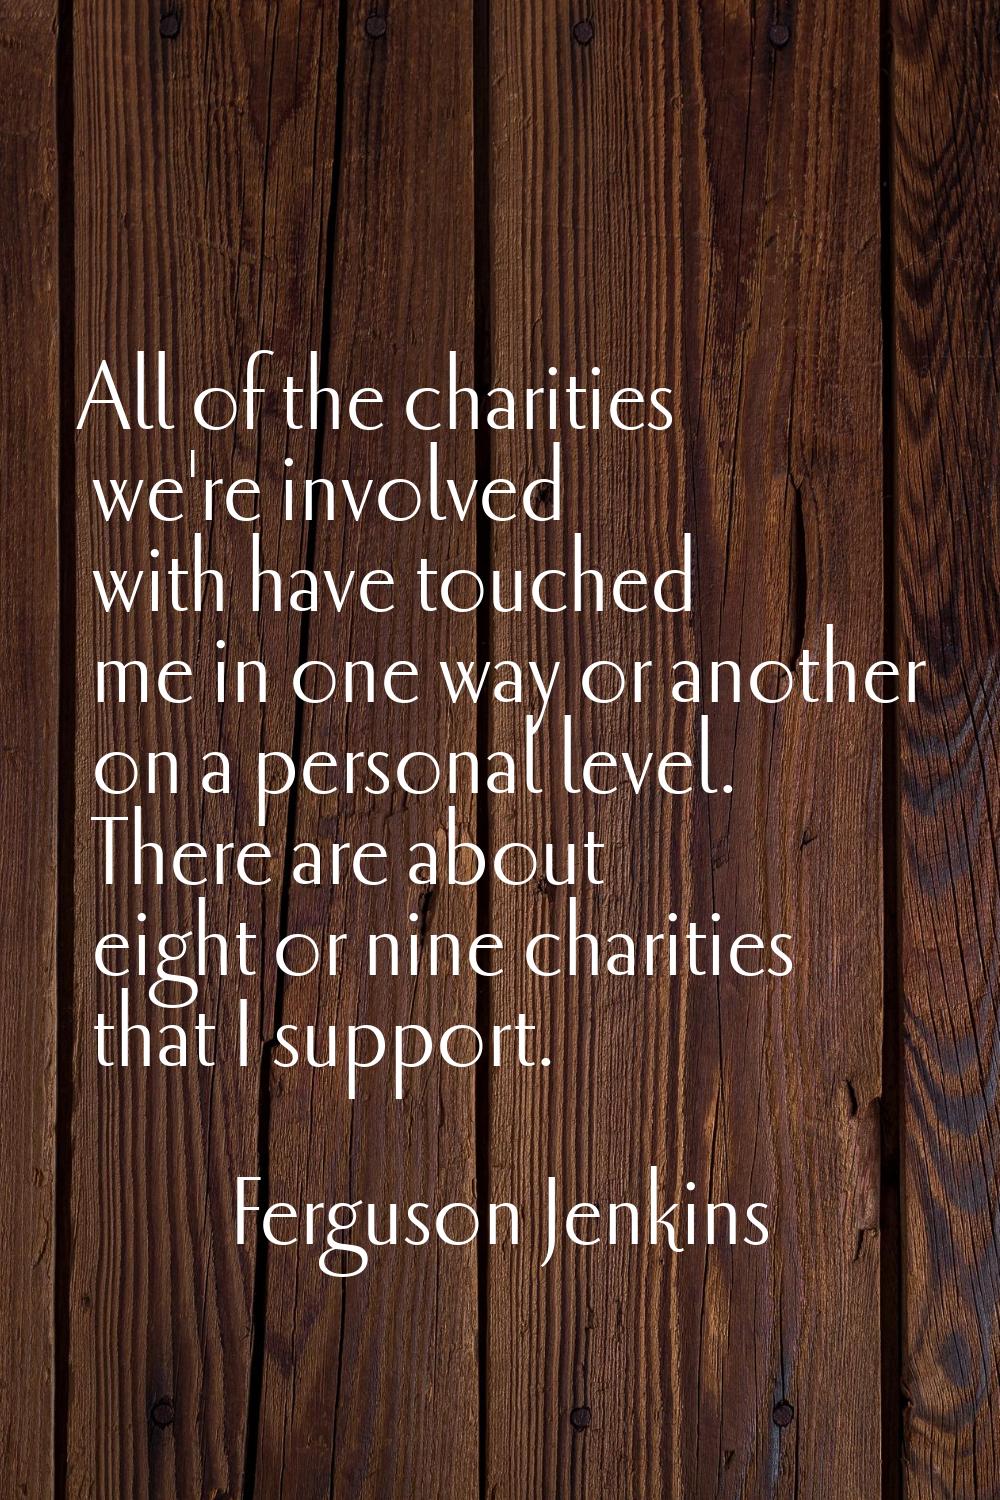 All of the charities we're involved with have touched me in one way or another on a personal level.